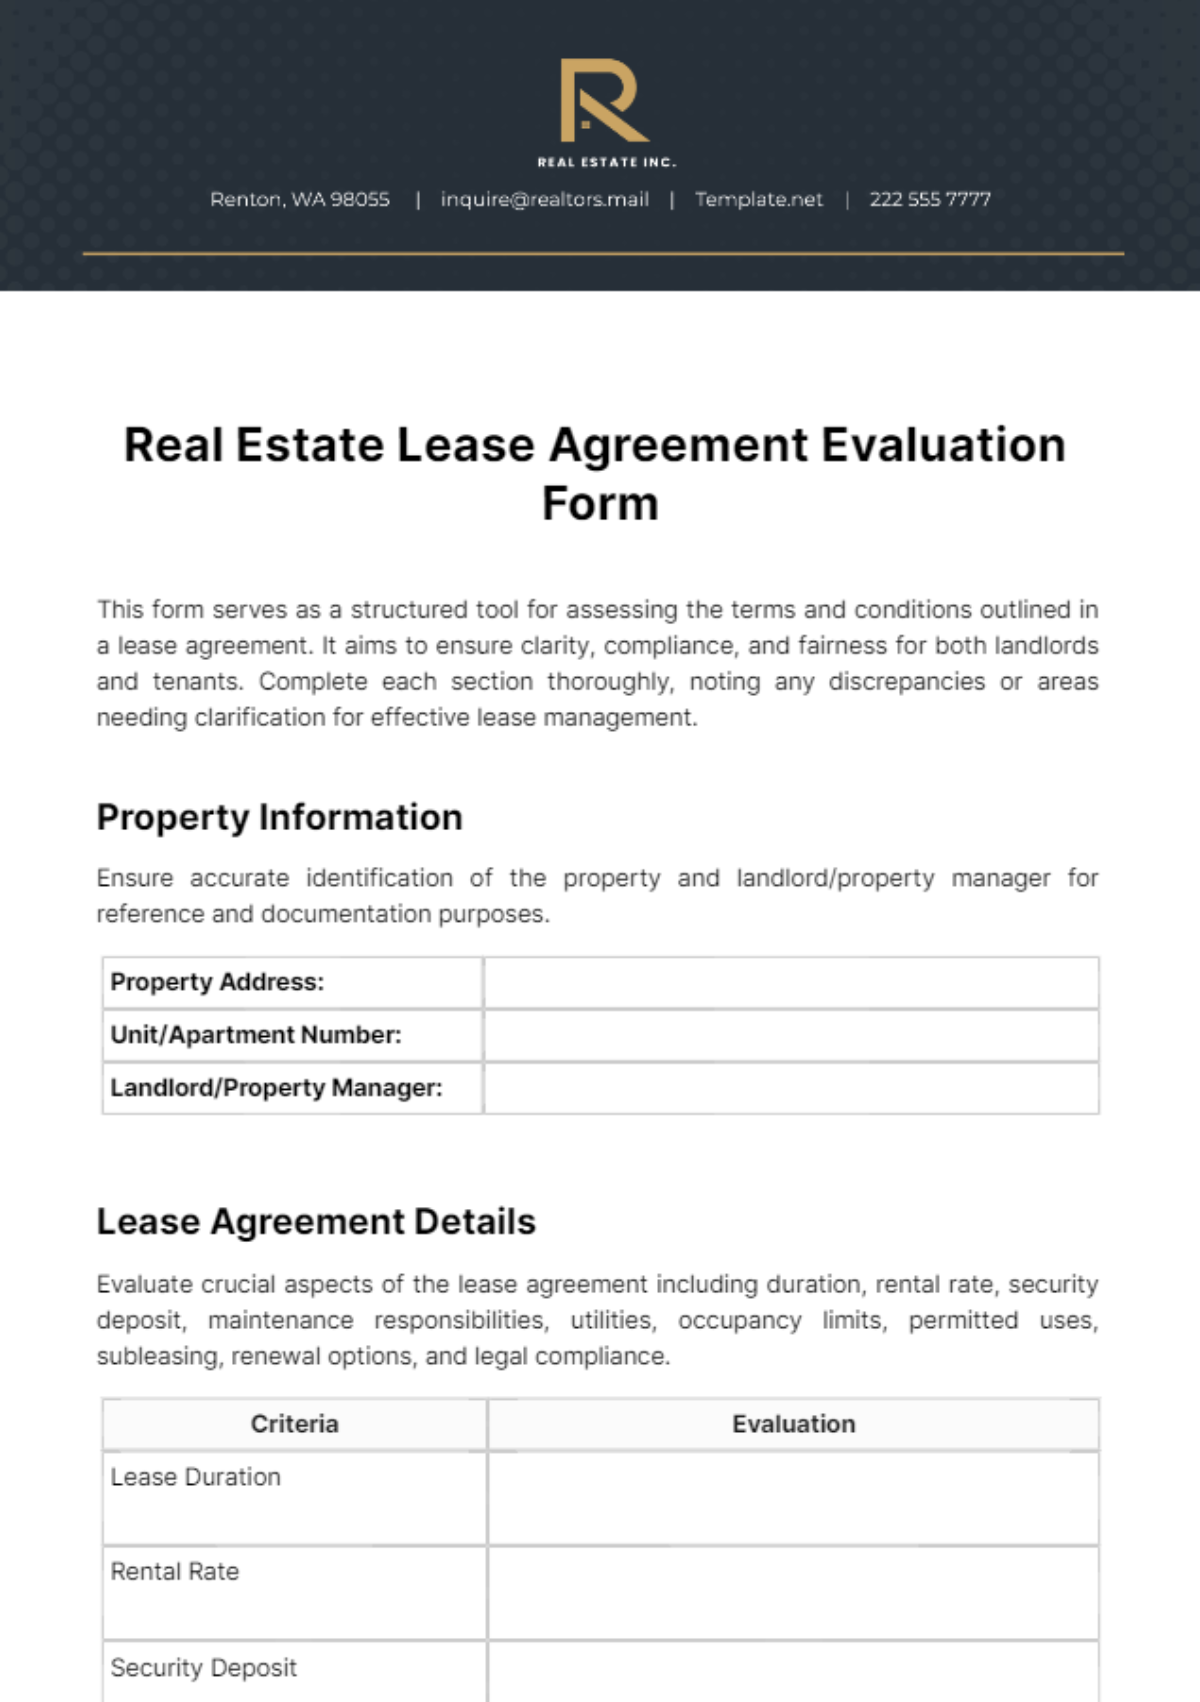 Real Estate Lease Agreement Evaluation Form Template